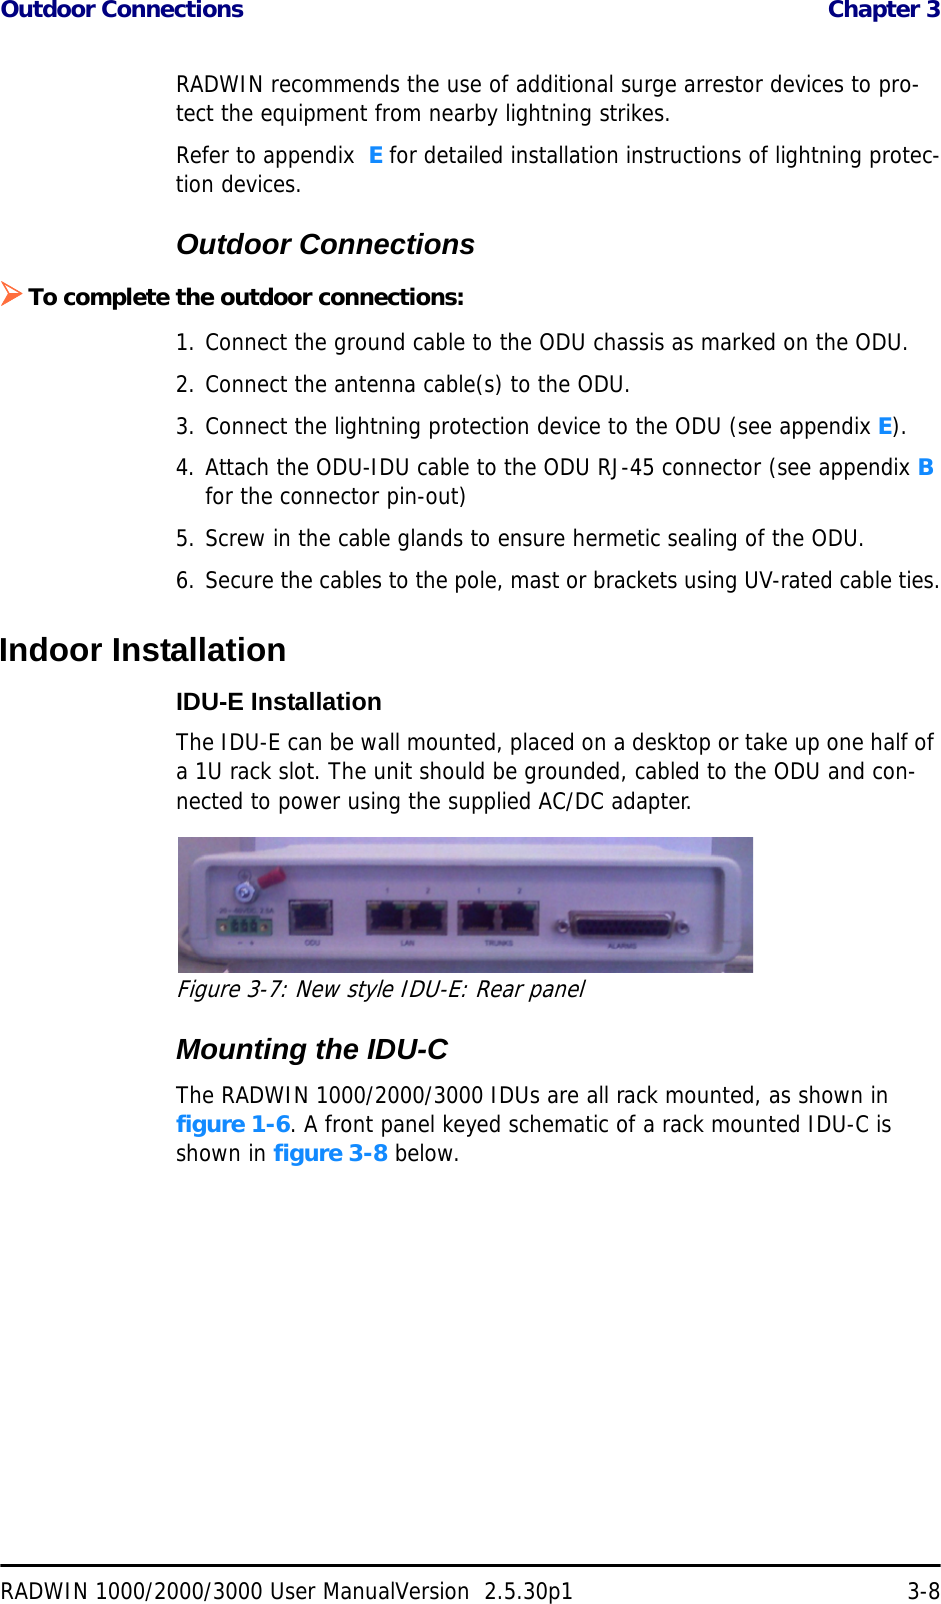 Outdoor Connections  Chapter 3RADWIN 1000/2000/3000 User ManualVersion  2.5.30p1 3-8RADWIN recommends the use of additional surge arrestor devices to pro-tect the equipment from nearby lightning strikes.Refer to appendix  E for detailed installation instructions of lightning protec-tion devices.Outdoor Connections¾To complete the outdoor connections:1. Connect the ground cable to the ODU chassis as marked on the ODU.2. Connect the antenna cable(s) to the ODU.3. Connect the lightning protection device to the ODU (see appendix E).4. Attach the ODU-IDU cable to the ODU RJ-45 connector (see appendix B for the connector pin-out)5. Screw in the cable glands to ensure hermetic sealing of the ODU.6. Secure the cables to the pole, mast or brackets using UV-rated cable ties.Indoor InstallationIDU-E InstallationThe IDU-E can be wall mounted, placed on a desktop or take up one half of a 1U rack slot. The unit should be grounded, cabled to the ODU and con-nected to power using the supplied AC/DC adapter.Figure 3-7: New style IDU-E: Rear panelMounting the IDU-CThe RADWIN 1000/2000/3000 IDUs are all rack mounted, as shown in figure 1-6. A front panel keyed schematic of a rack mounted IDU-C is shown in figure 3-8 below.